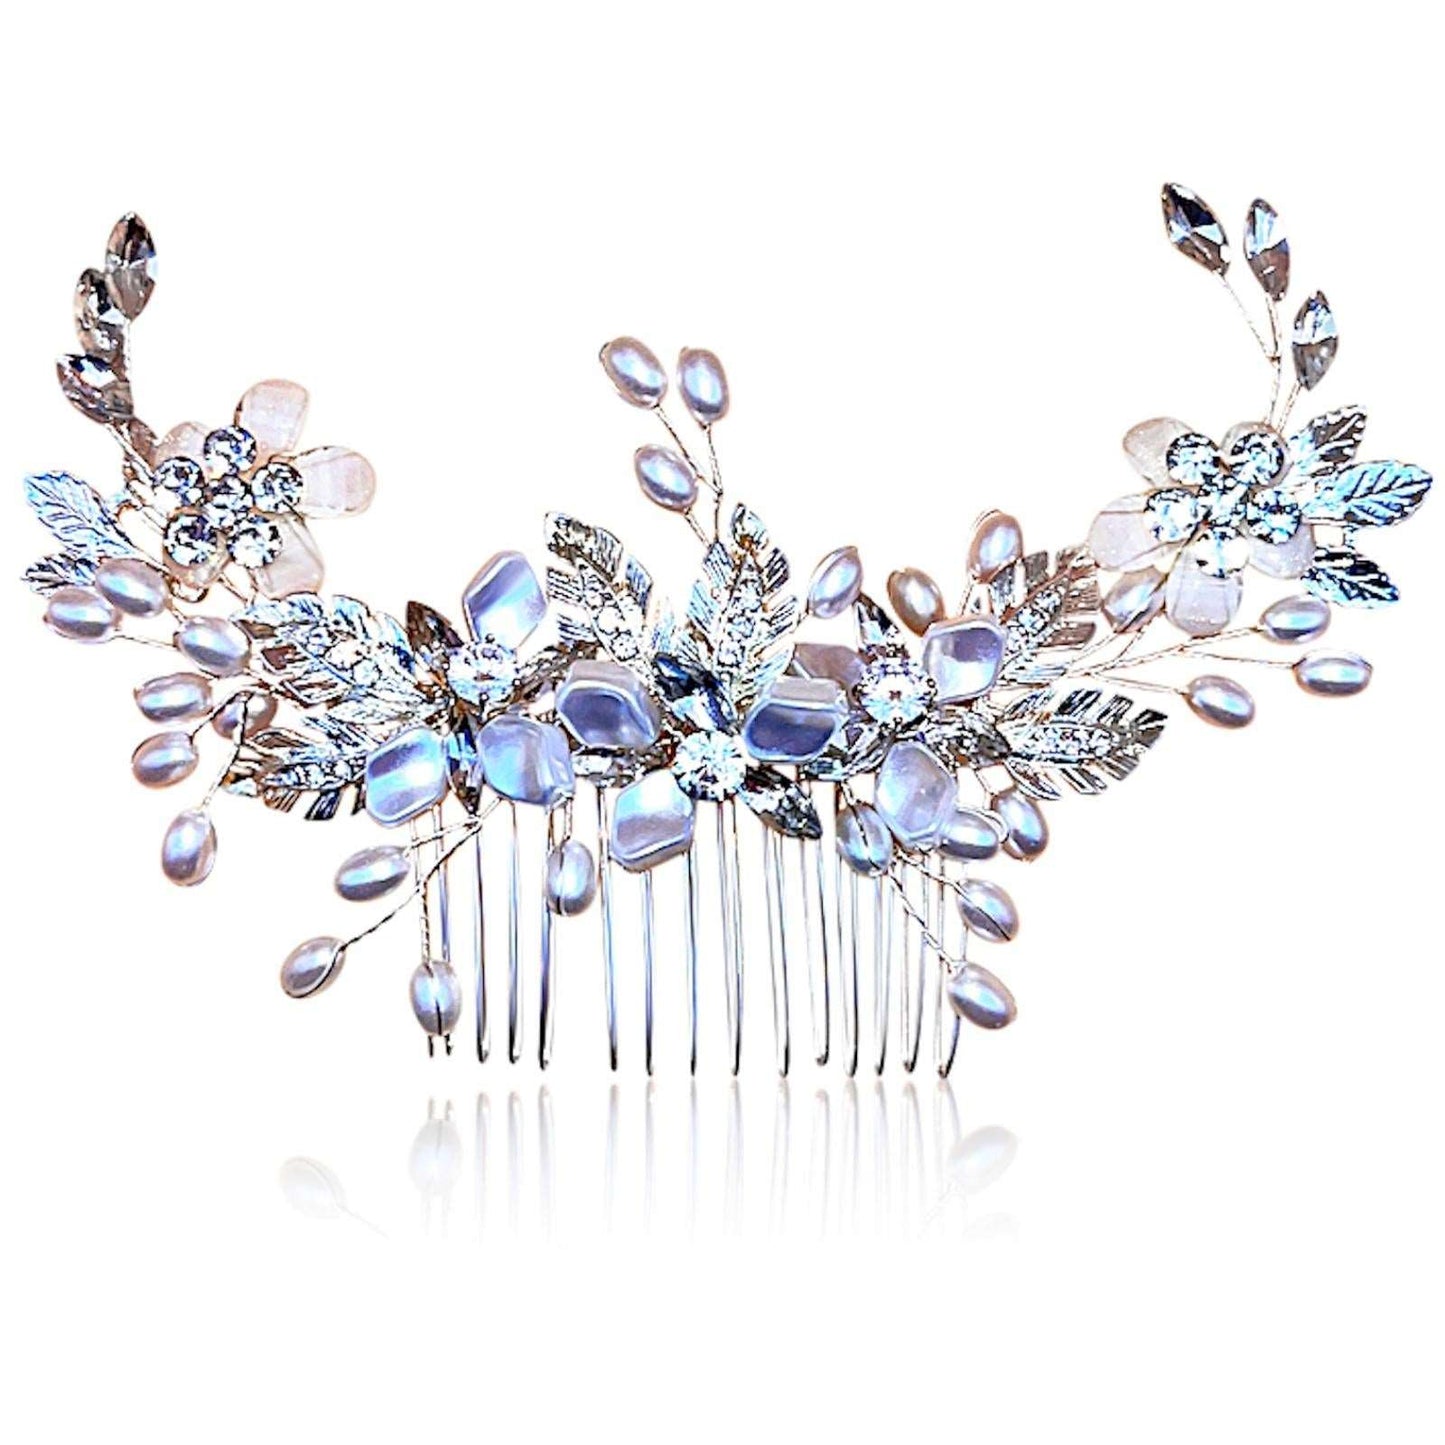 hair combs with pearl rhinestones and silver leaves in an upward display illuminated